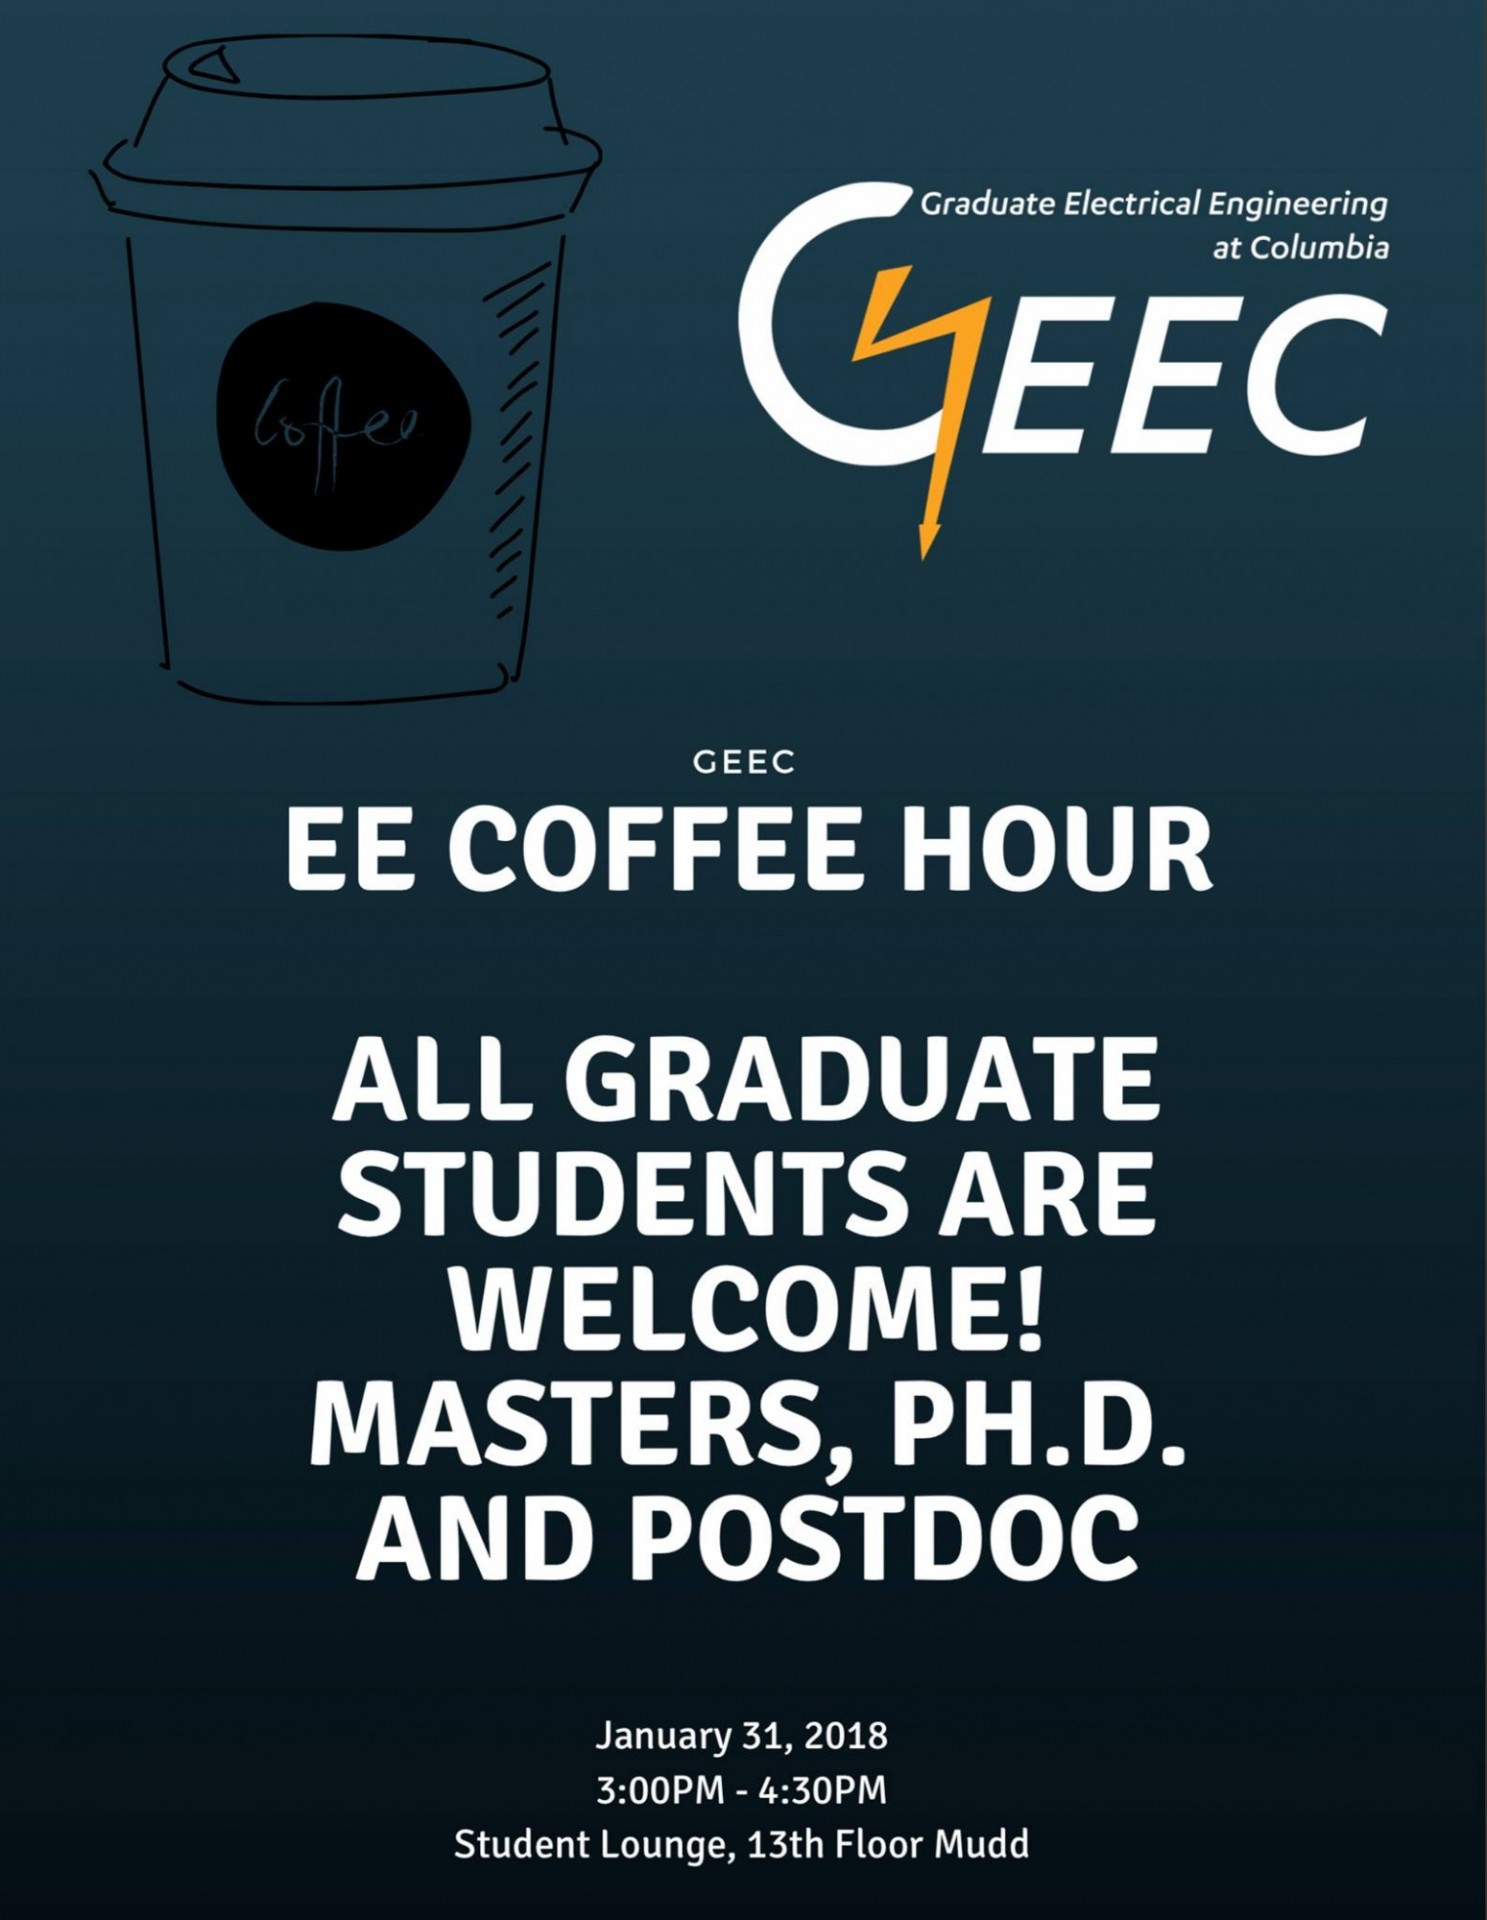 Graduate Electrical Engineering at Columbia Coffee Hour Event Flyer